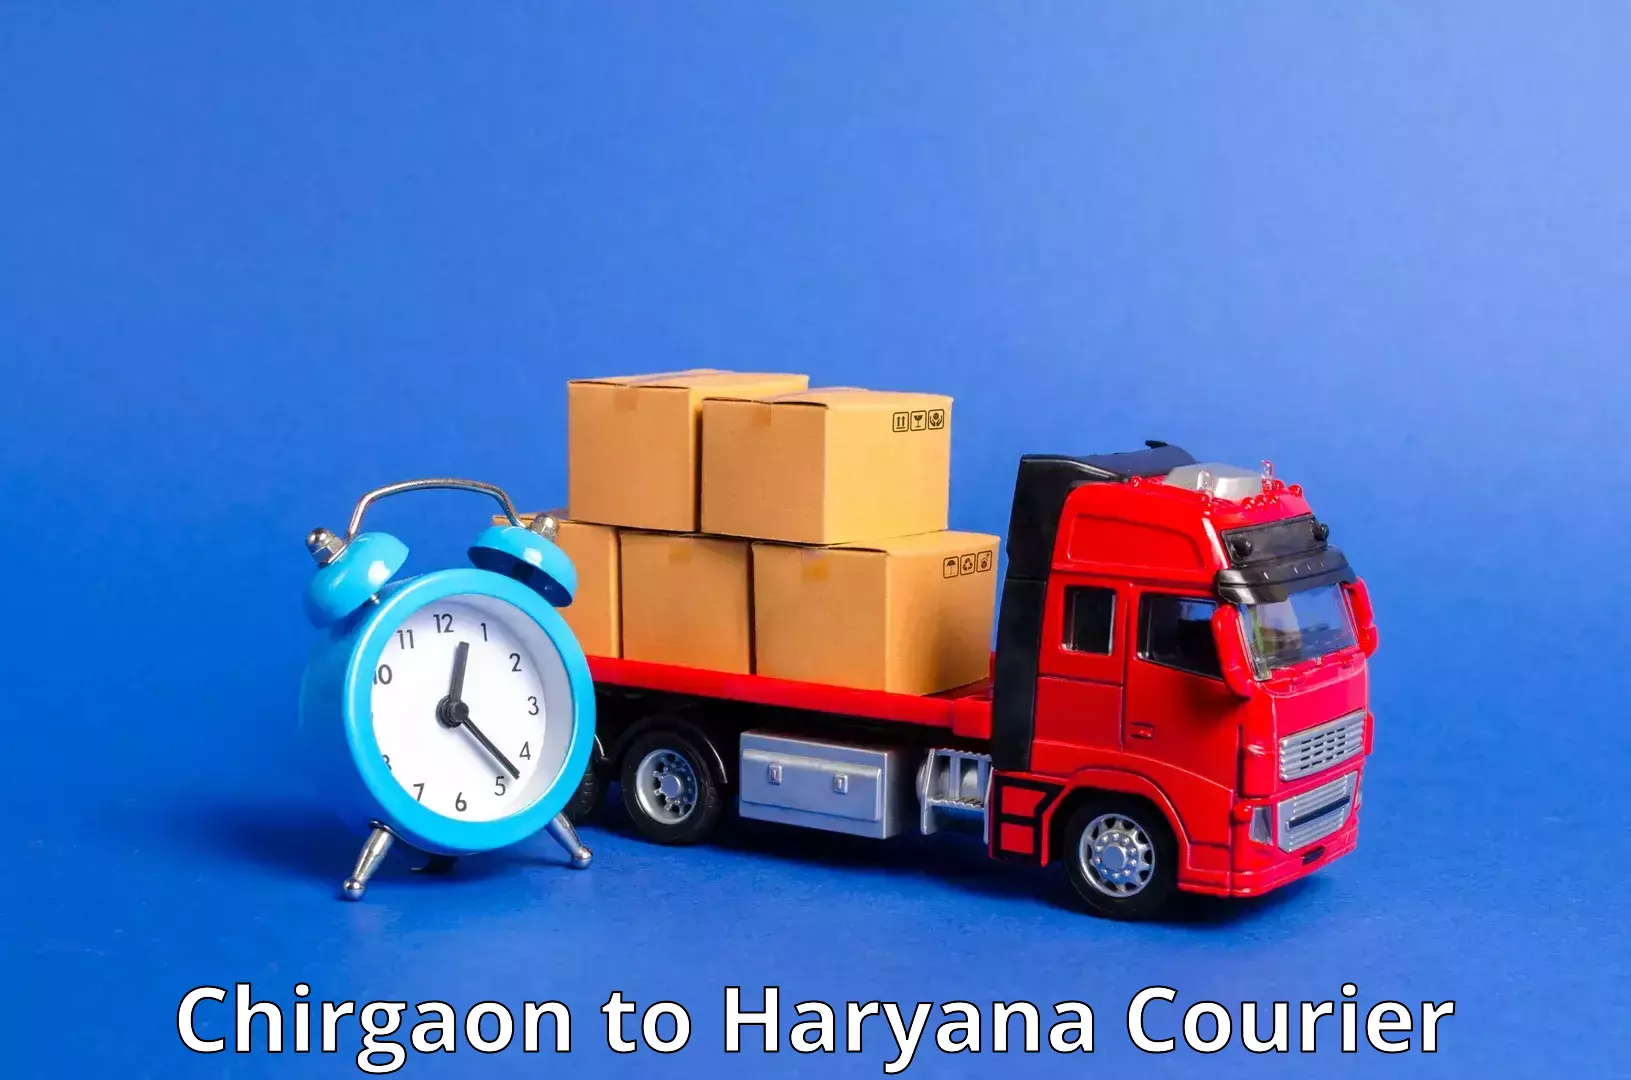 Next day courier in Chirgaon to Chaudhary Charan Singh Haryana Agricultural University Hisar